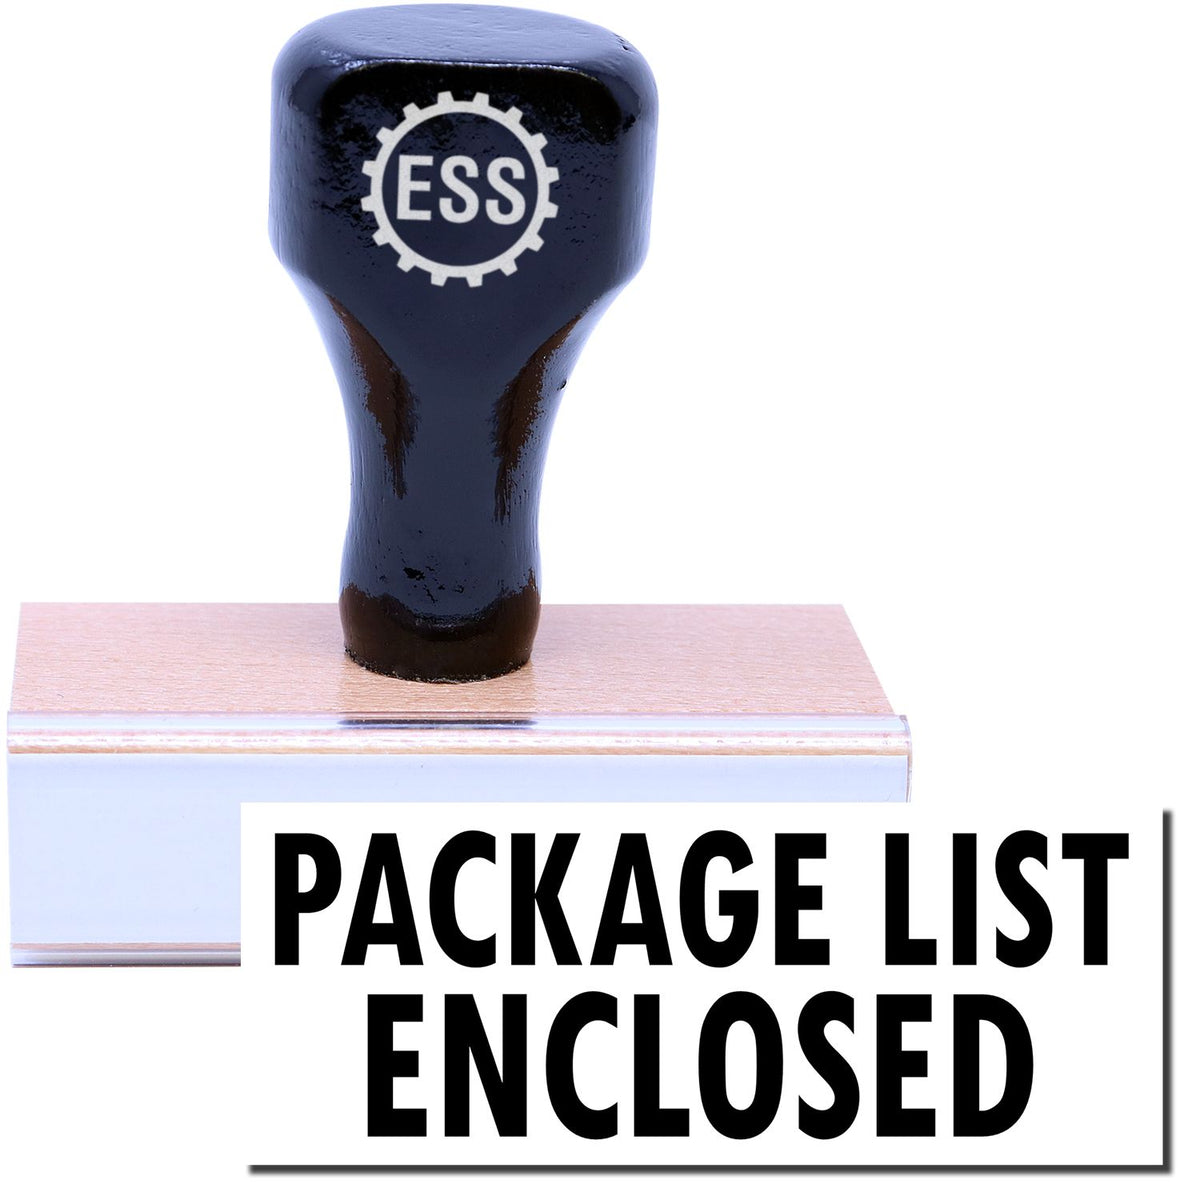 A stock office rubber stamp with a stamped image showing how the text &quot;PACKAGE LIST ENCLOSED&quot; is displayed after stamping.